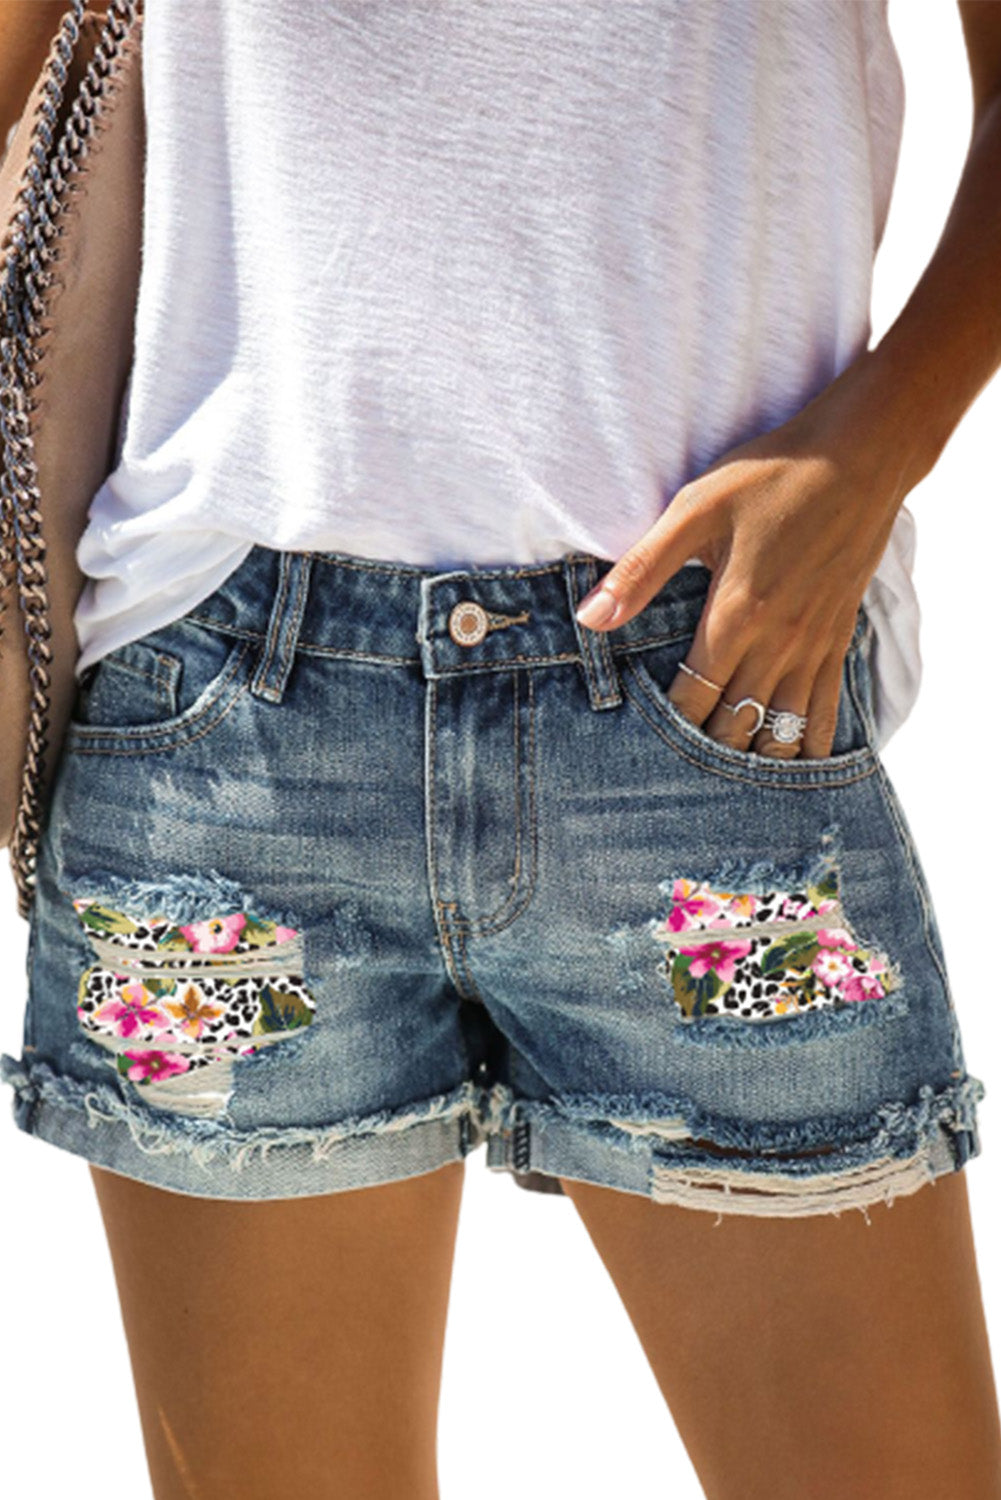 Sky Blue Womens Ripped Denim Shorts Floral Leopard Mid Rise Distressed Shorts LC7831047-4